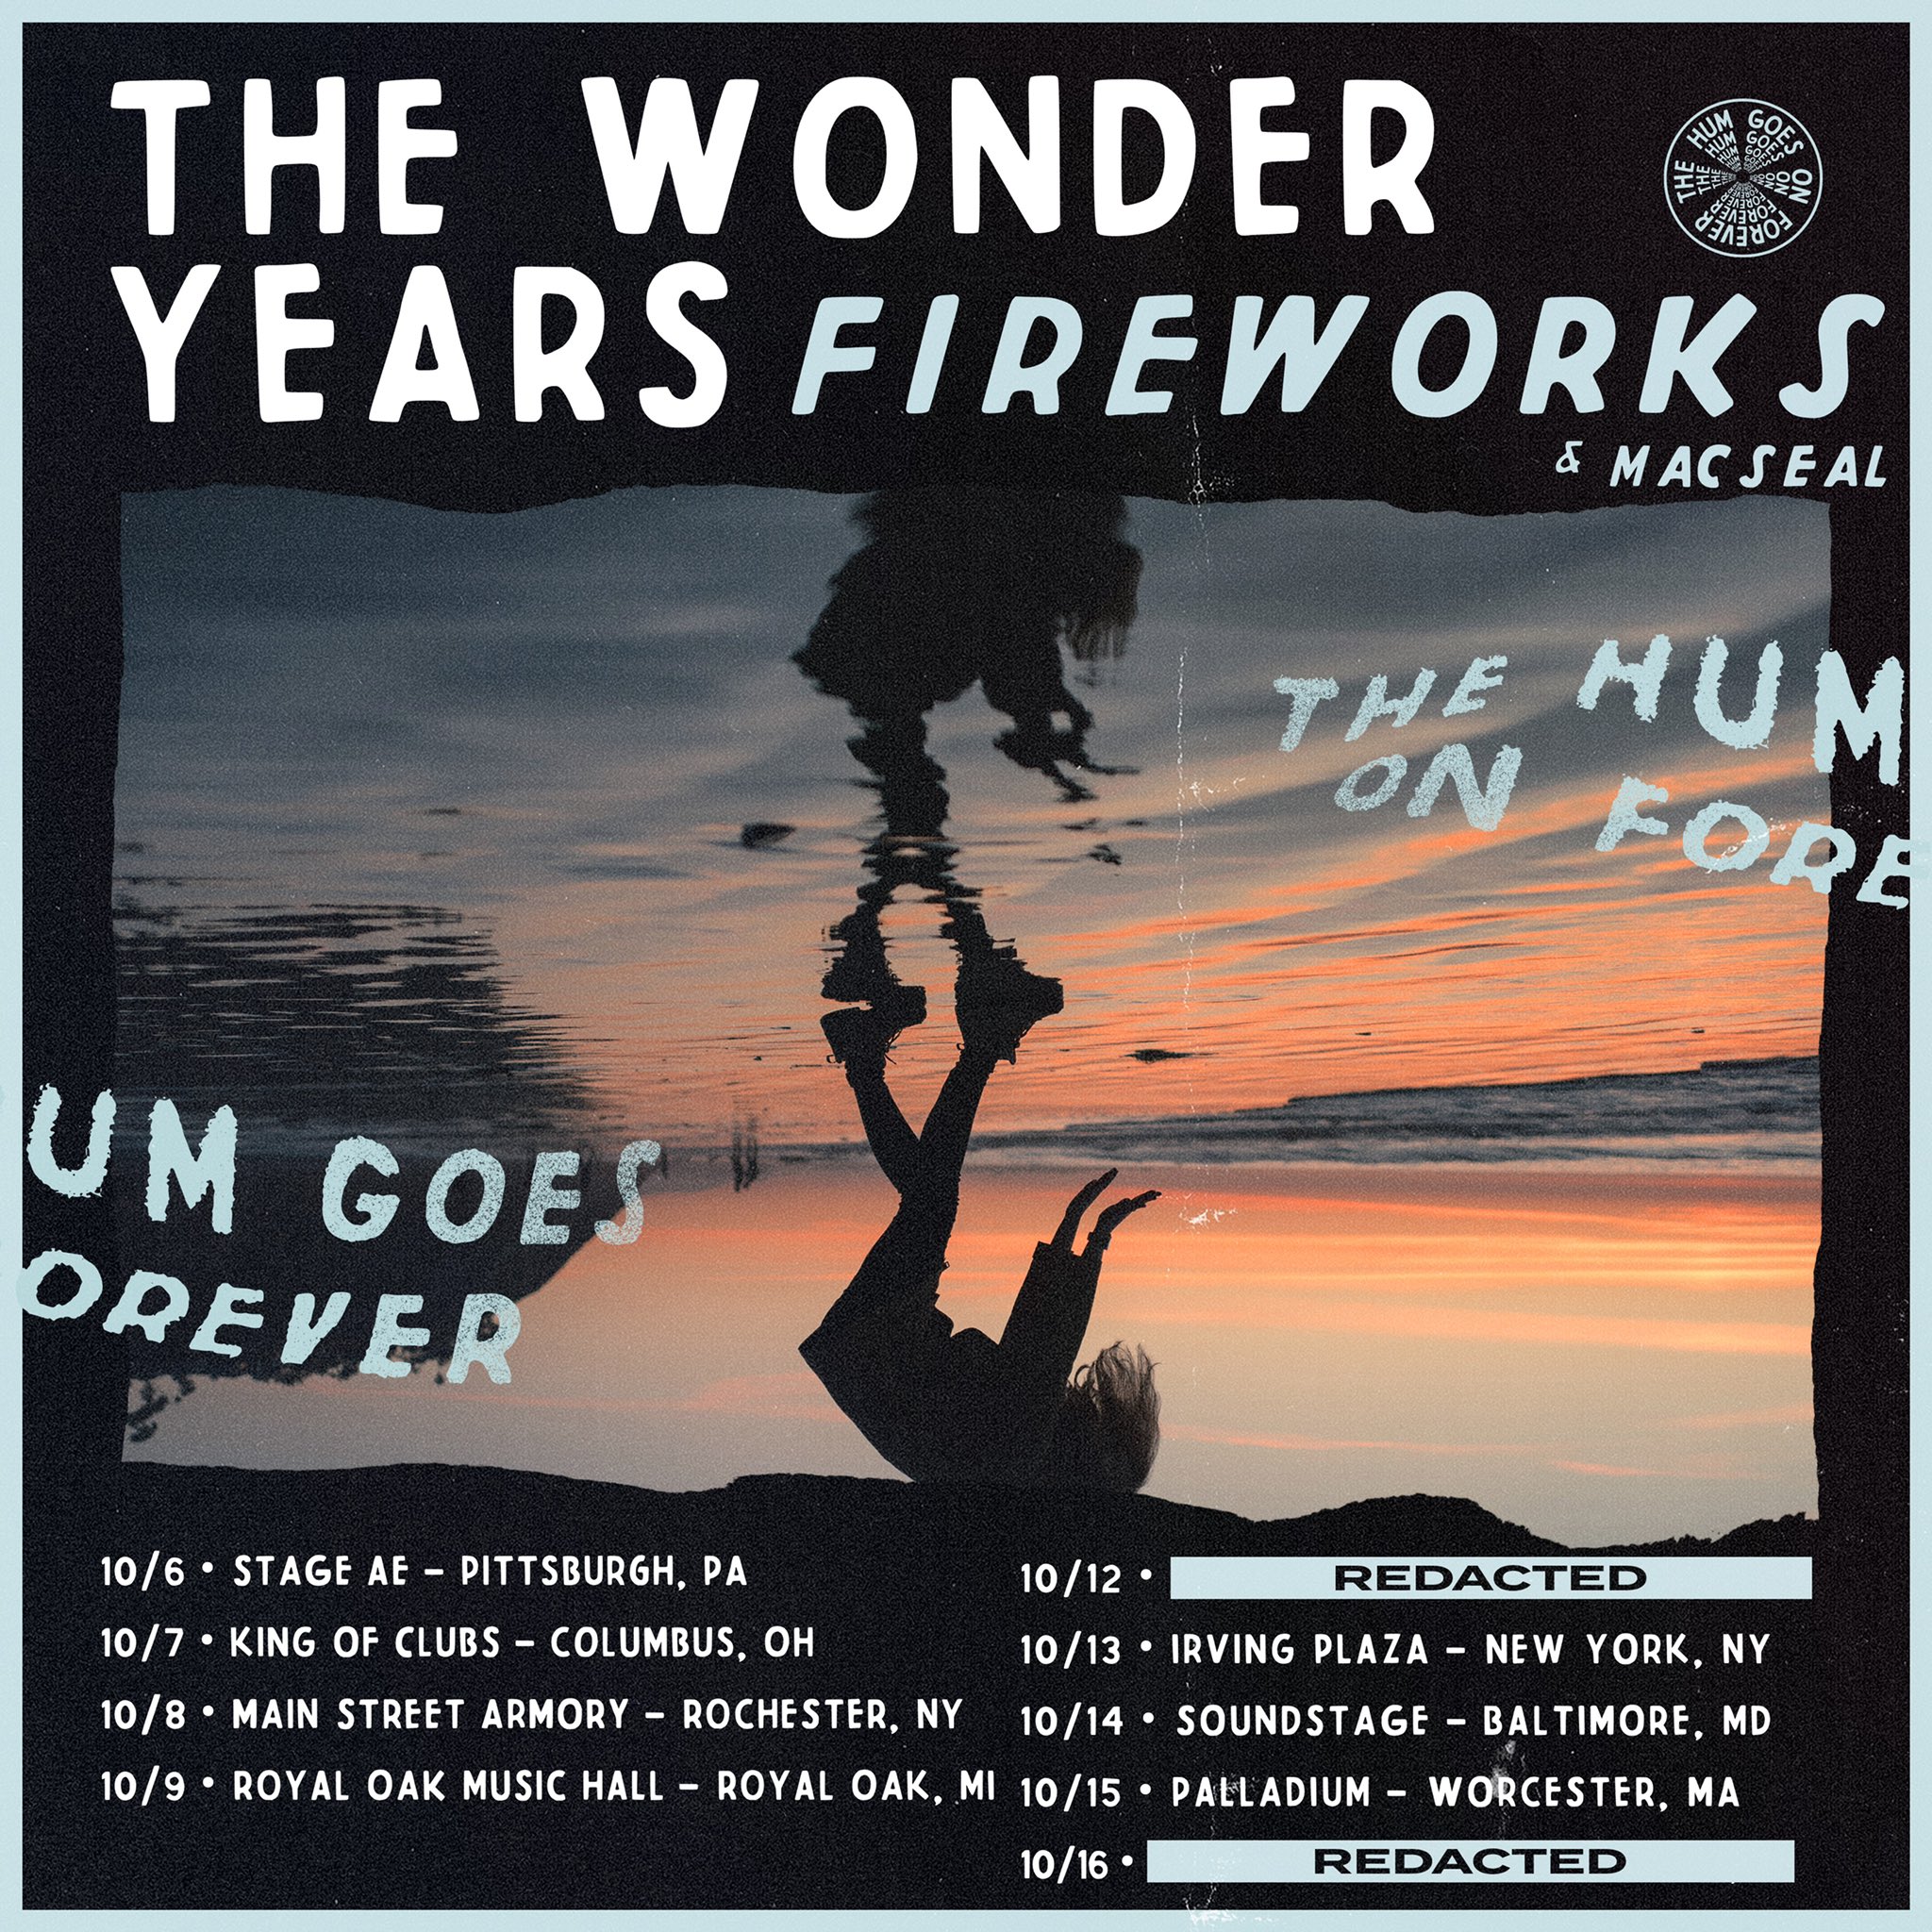 The Wonder Years Announce Tour Dates With Fireworks And Macseal SOUND